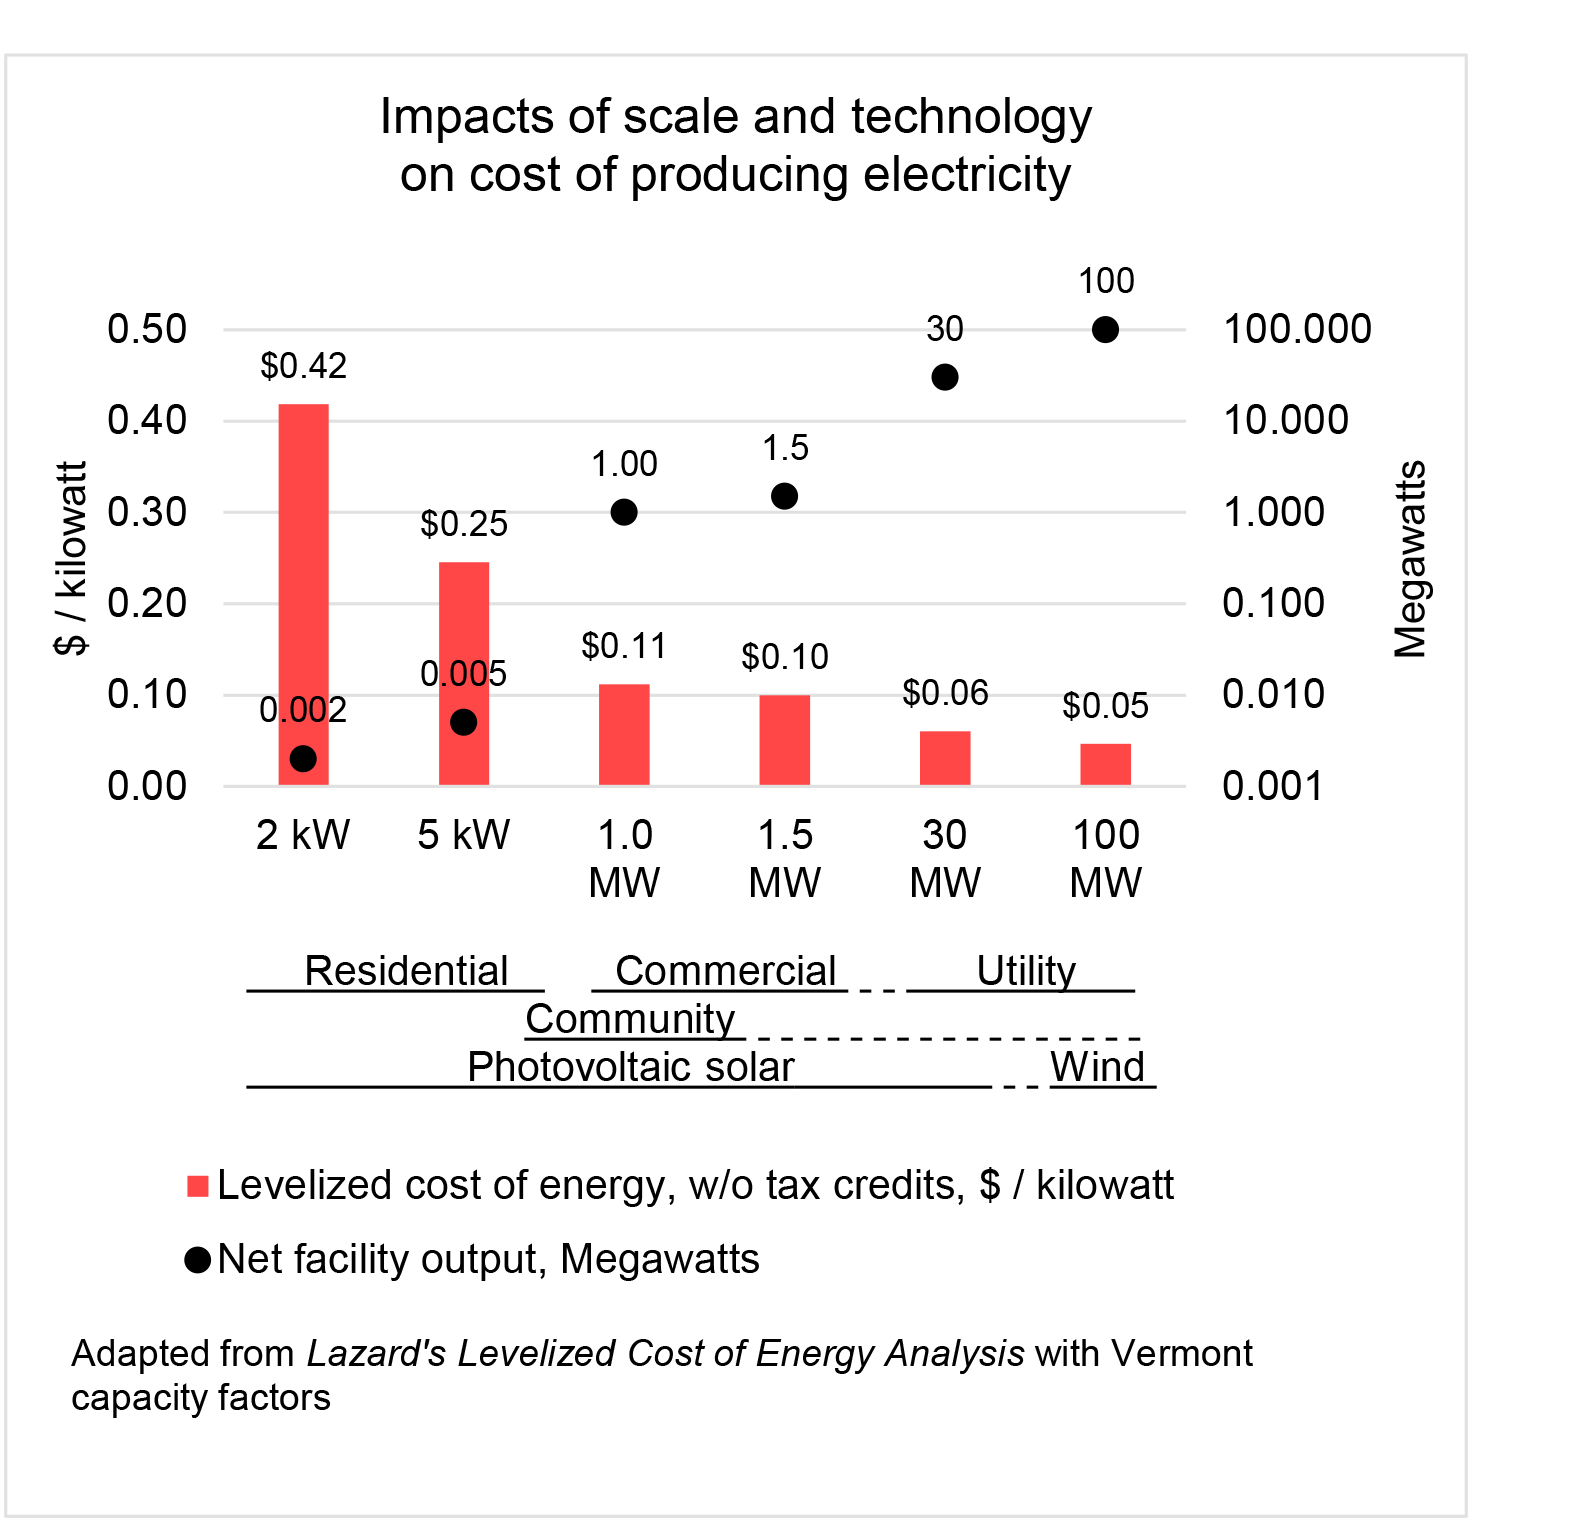 Economies of scale in producing electricity are substantial. Cost per kilowatt hour goes down as the size of the generating system goes up. The cost with a 2-kW photovoltaic array in Vermont, 42 cents, is seven times larger than the 6-cent cost with a 30-MW, utility-scale array.